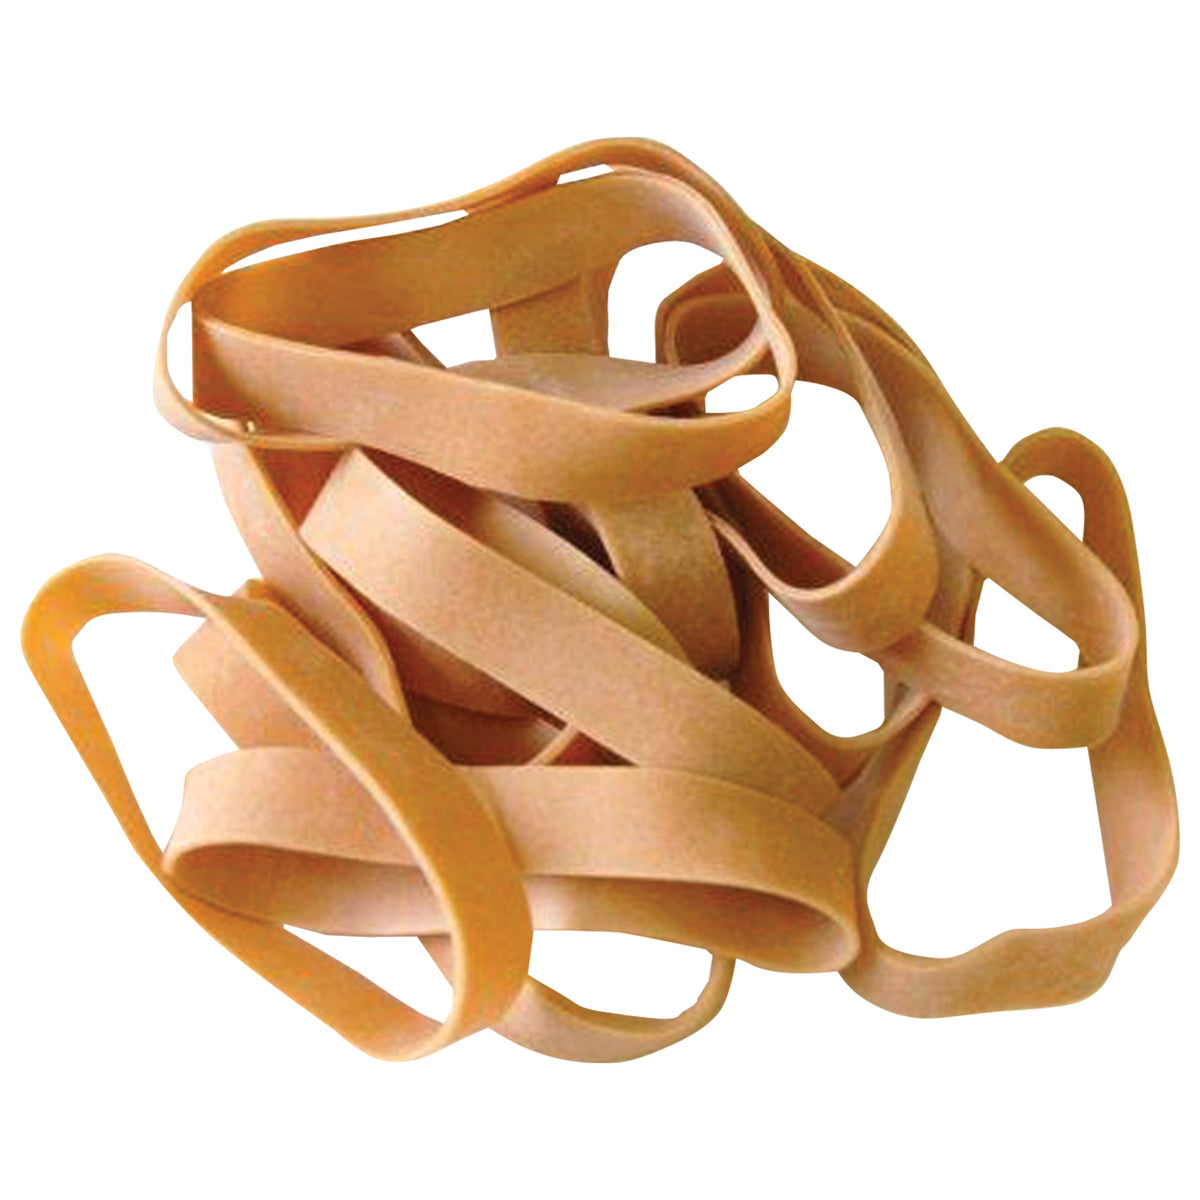 Rubber Bands, #84 (Pack of 150)